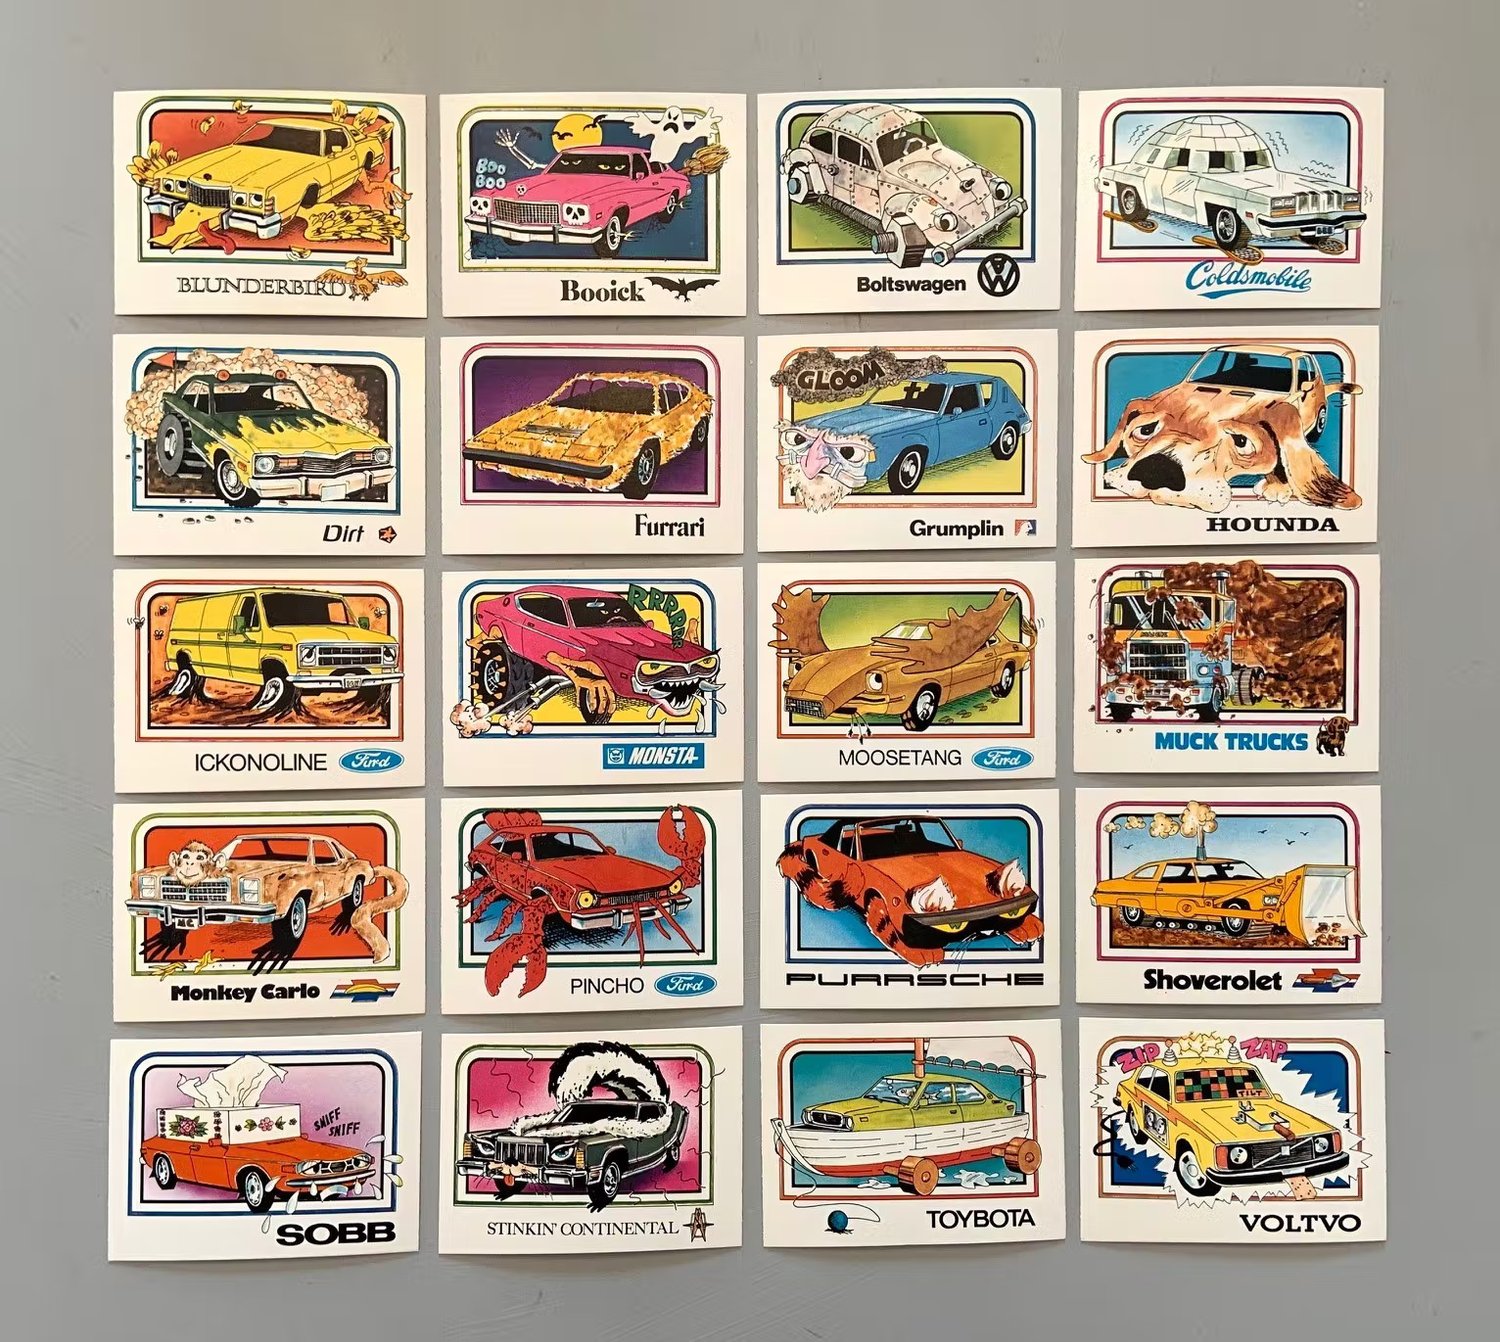 In 1976, building a set of Krazy Cars required a lot of Wonder Bread — Petersen Automotive Museum